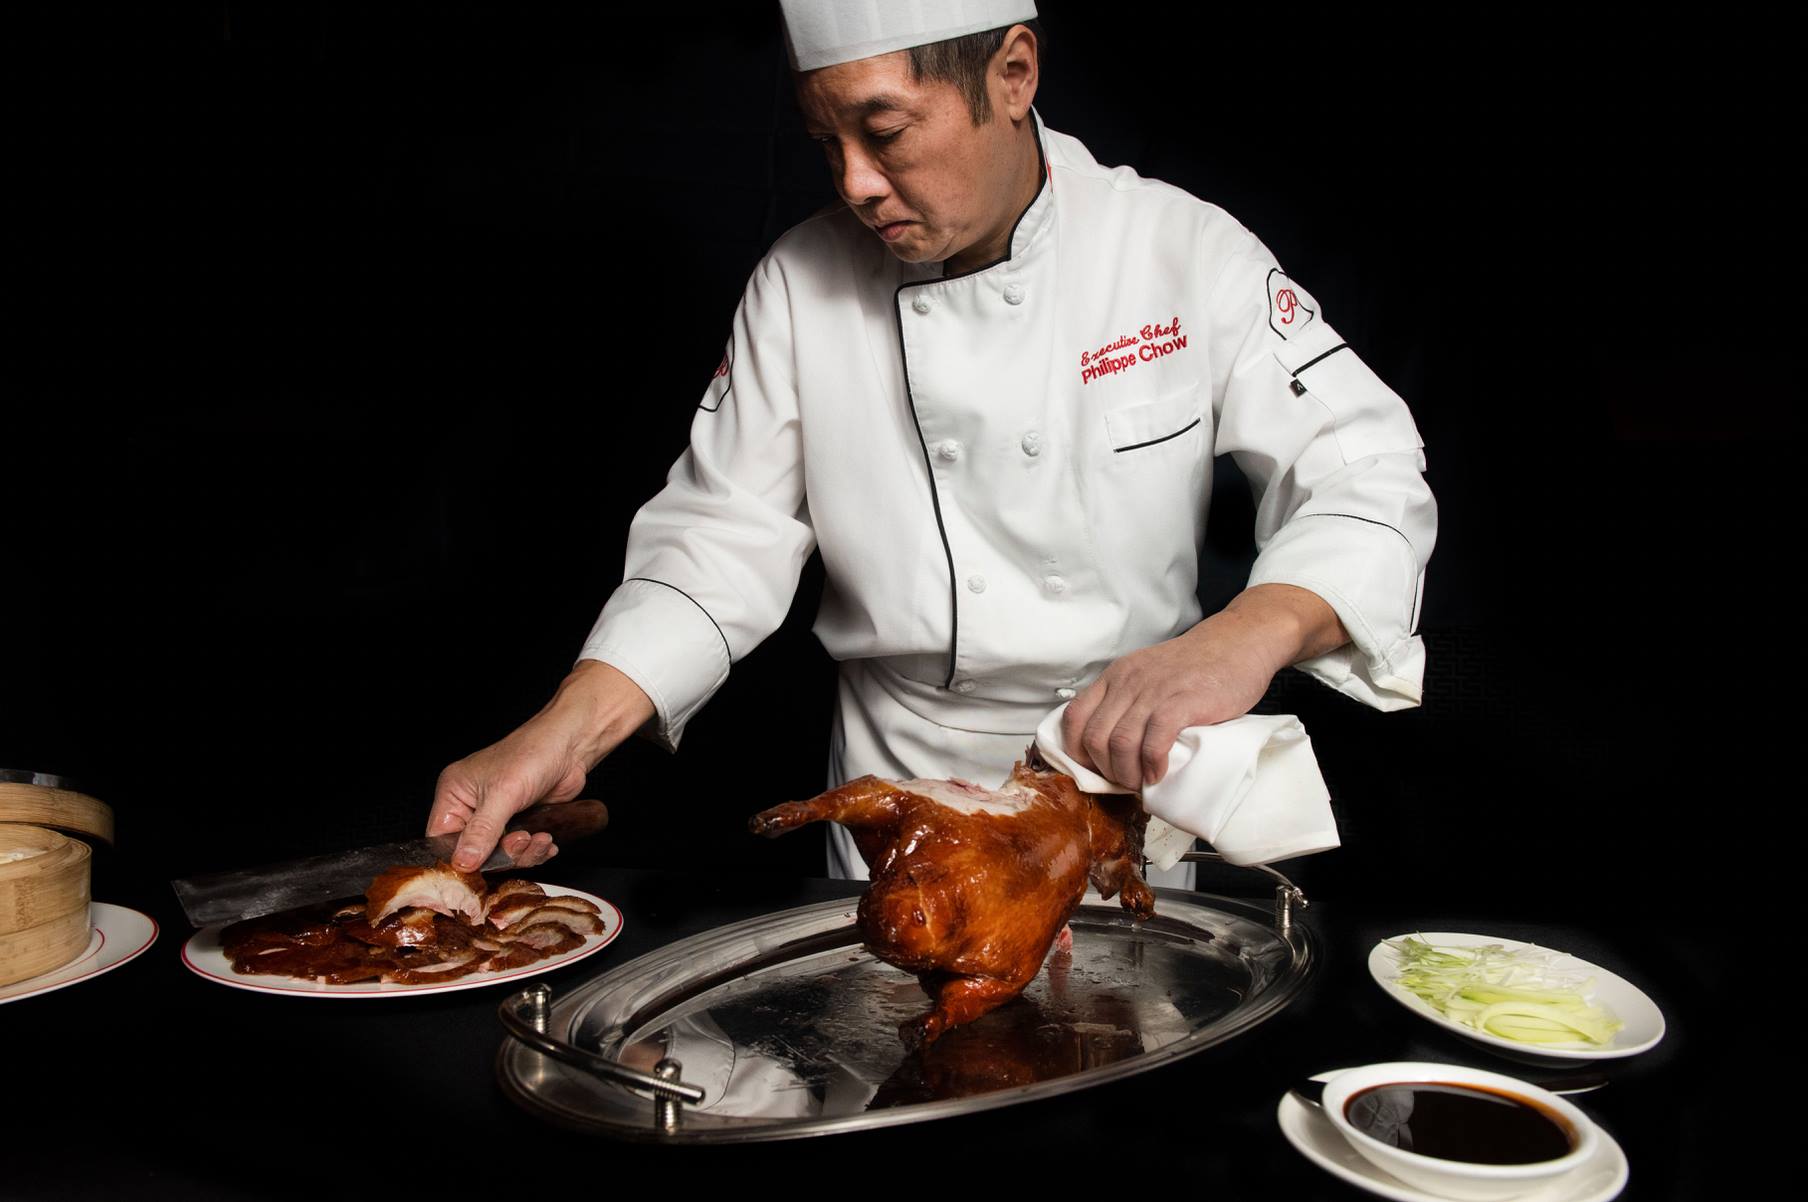 Philippe Chow preparing duck in a white chef jacket.